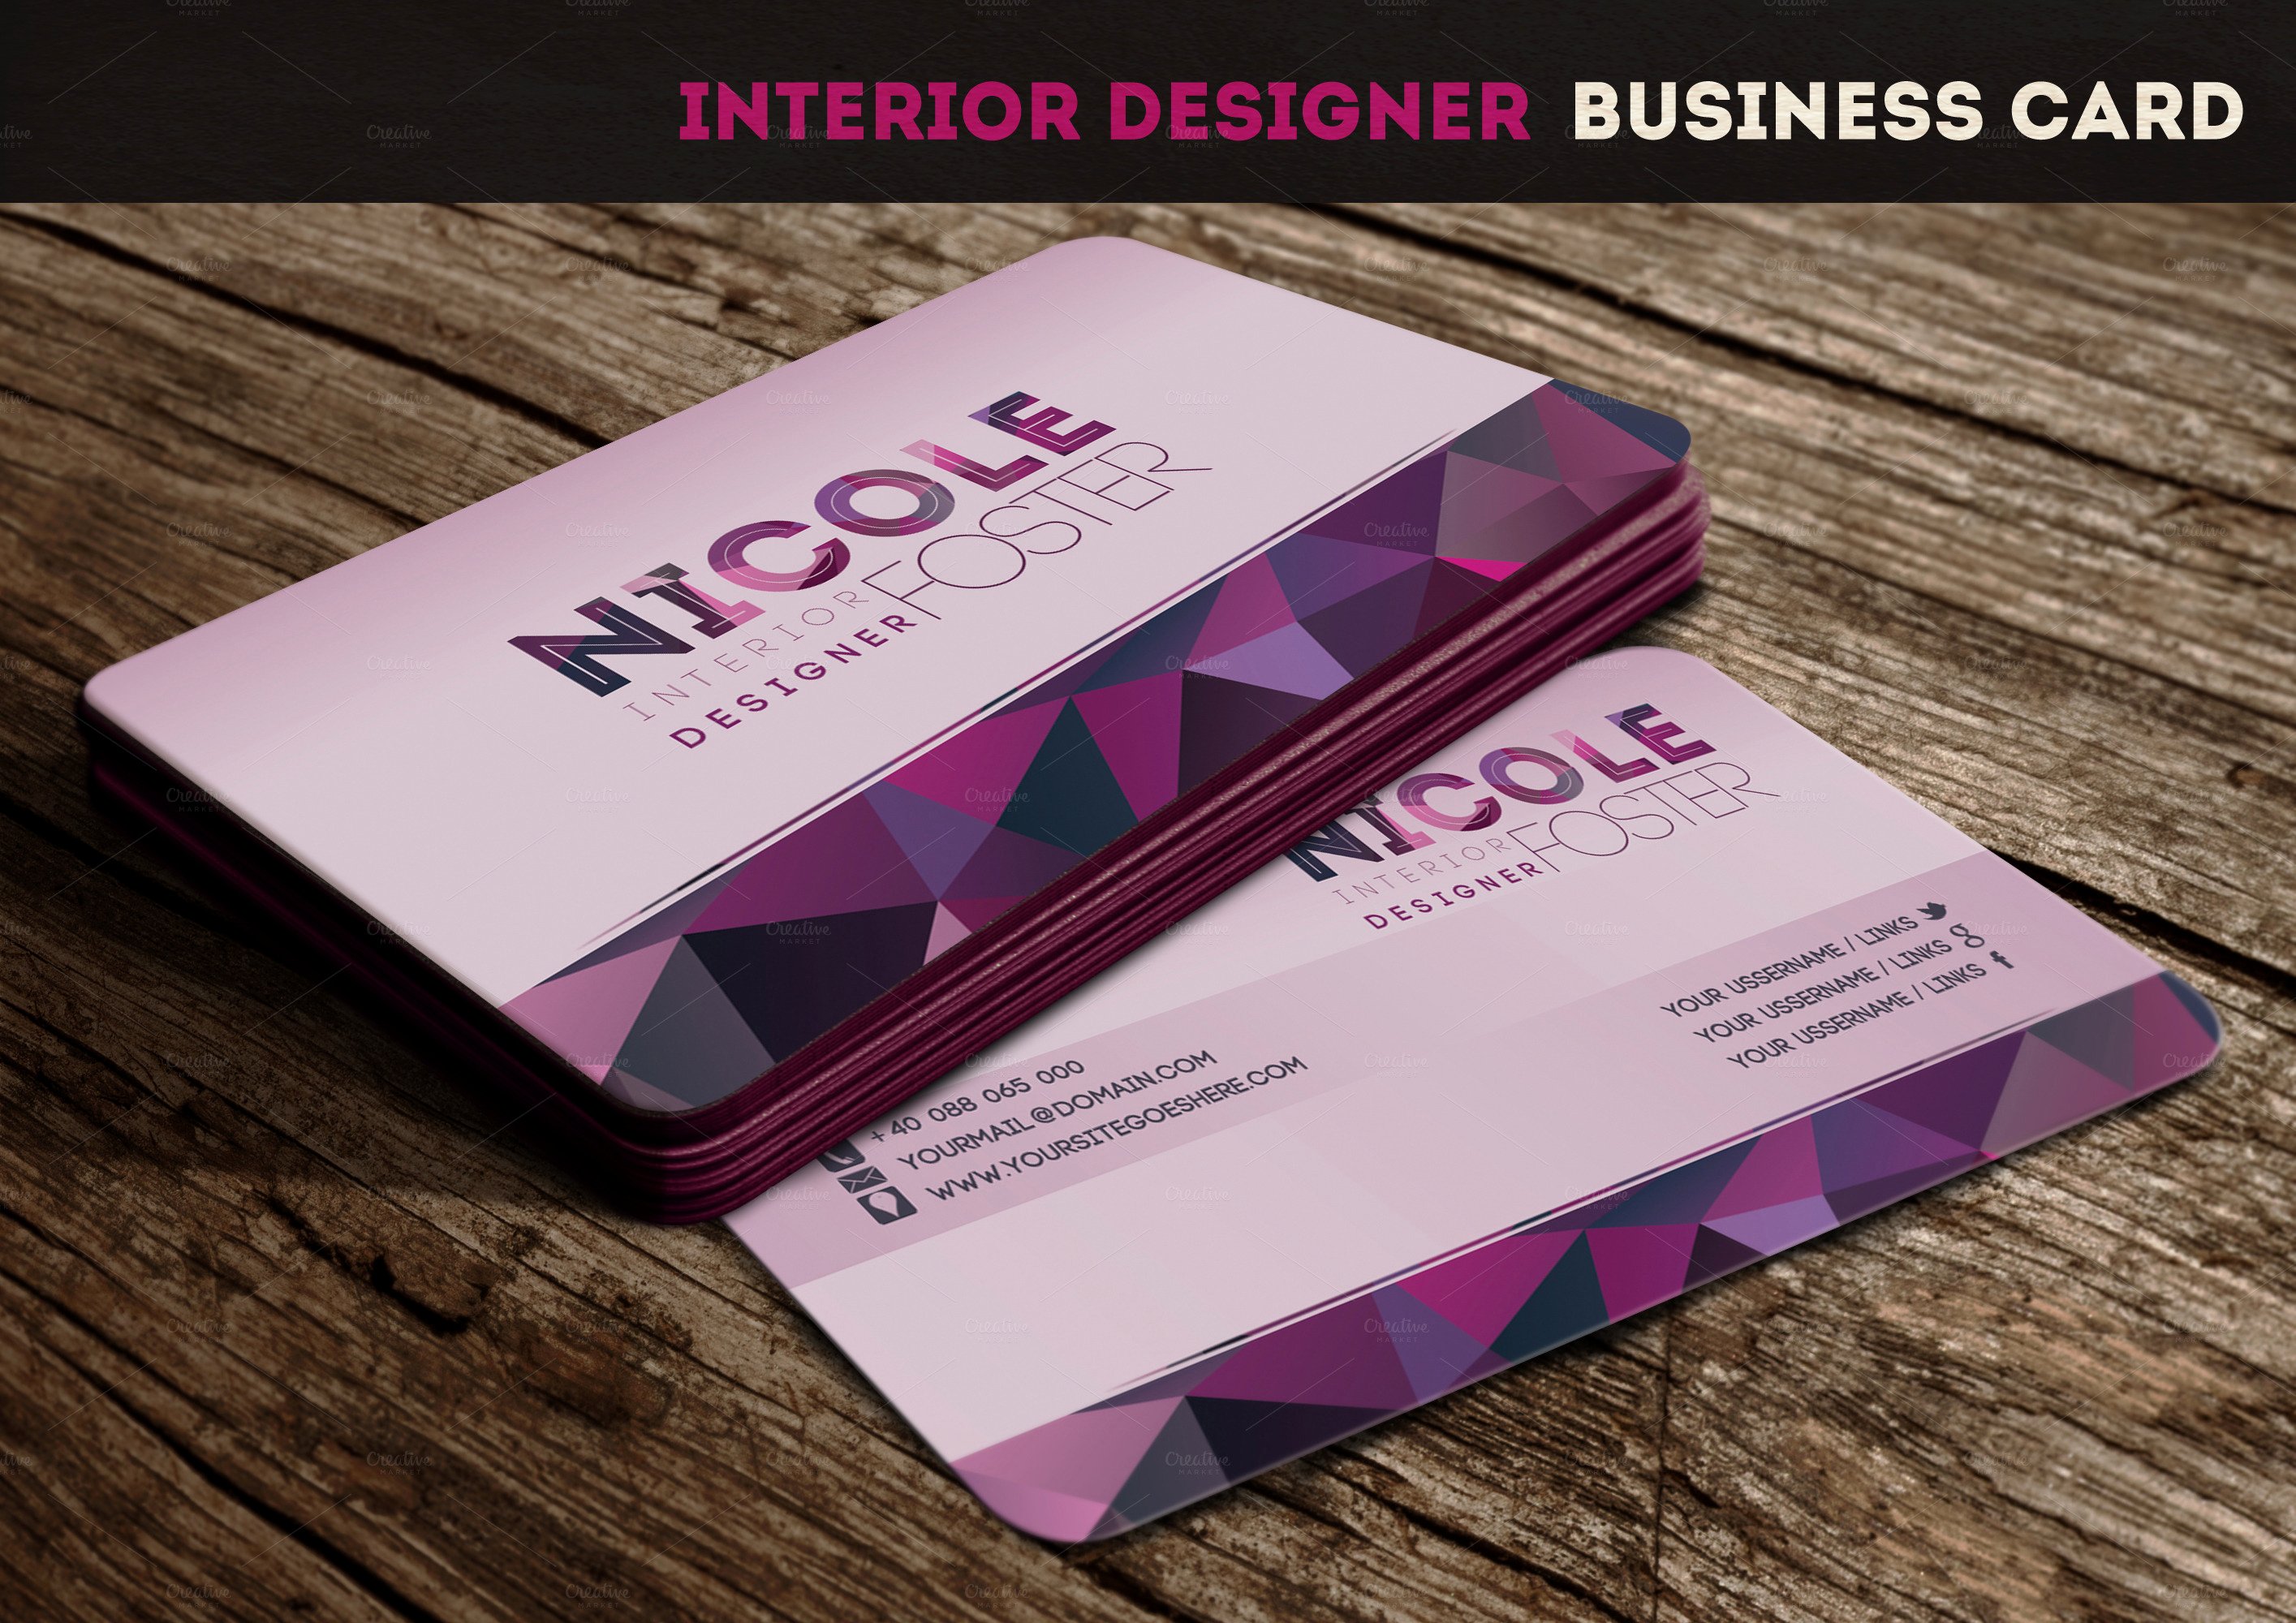 Interior Designers Business Cards Awesome Interior Designer Business Card Business Card Templates On Creative Market